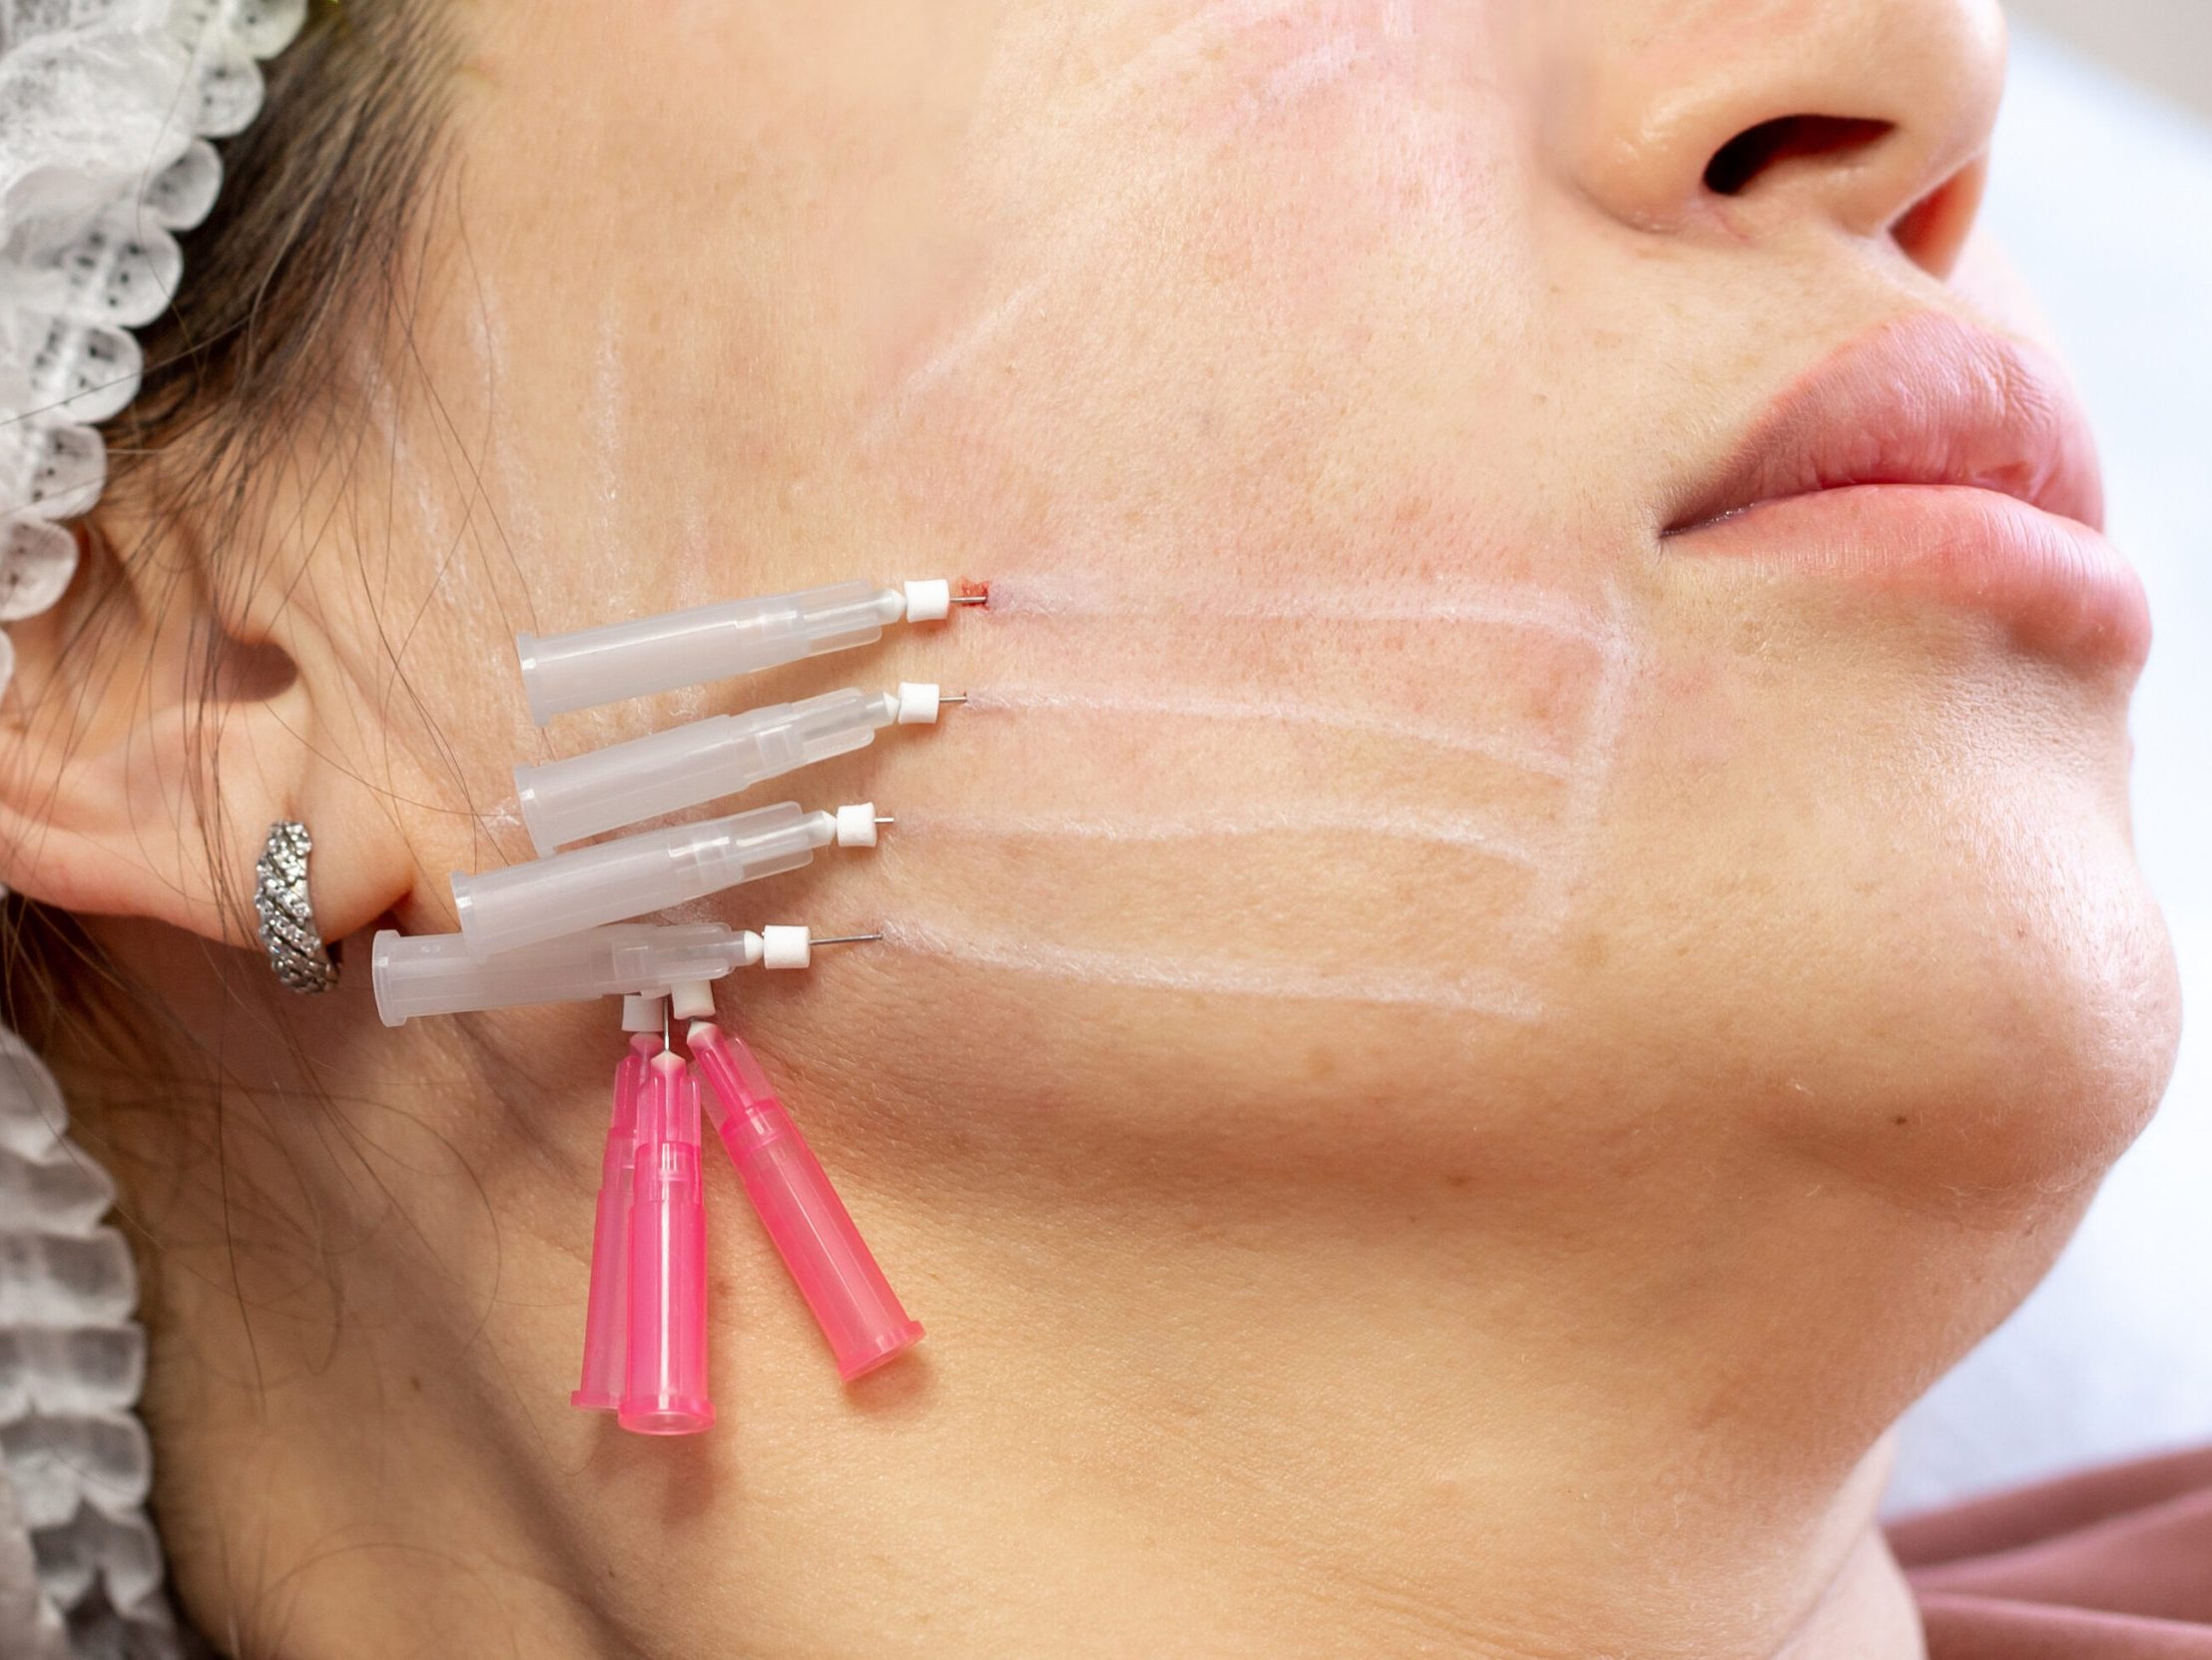 Close-up view of PDO threads, a type of dissolvable suture material commonly employed in non-surgical facelifts and skin rejuvenation treatments.